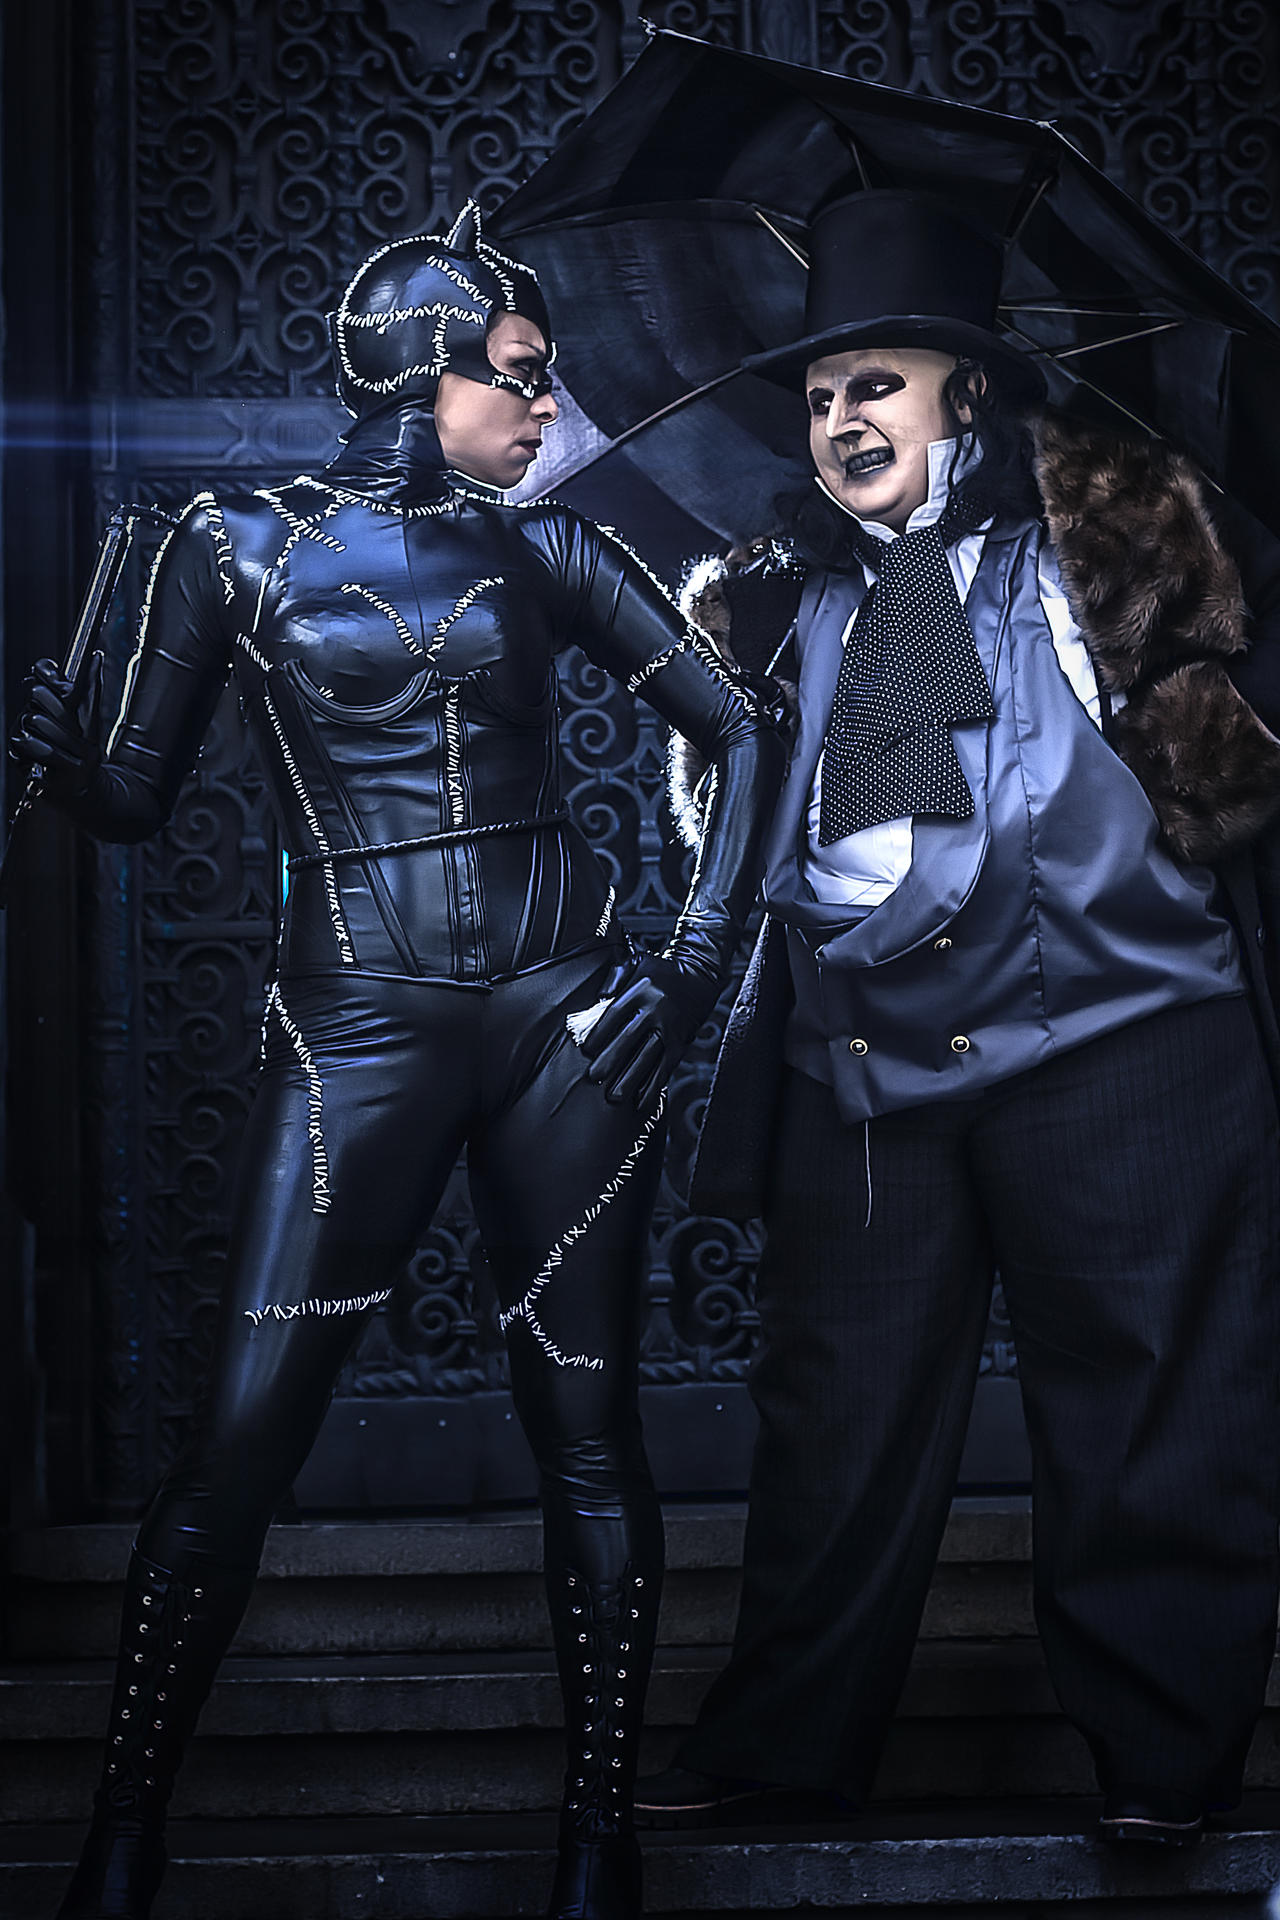 CATWOMAN AND THE PENGUIN-BATMAN RETURNS COSPLAY by andycold on DeviantArt